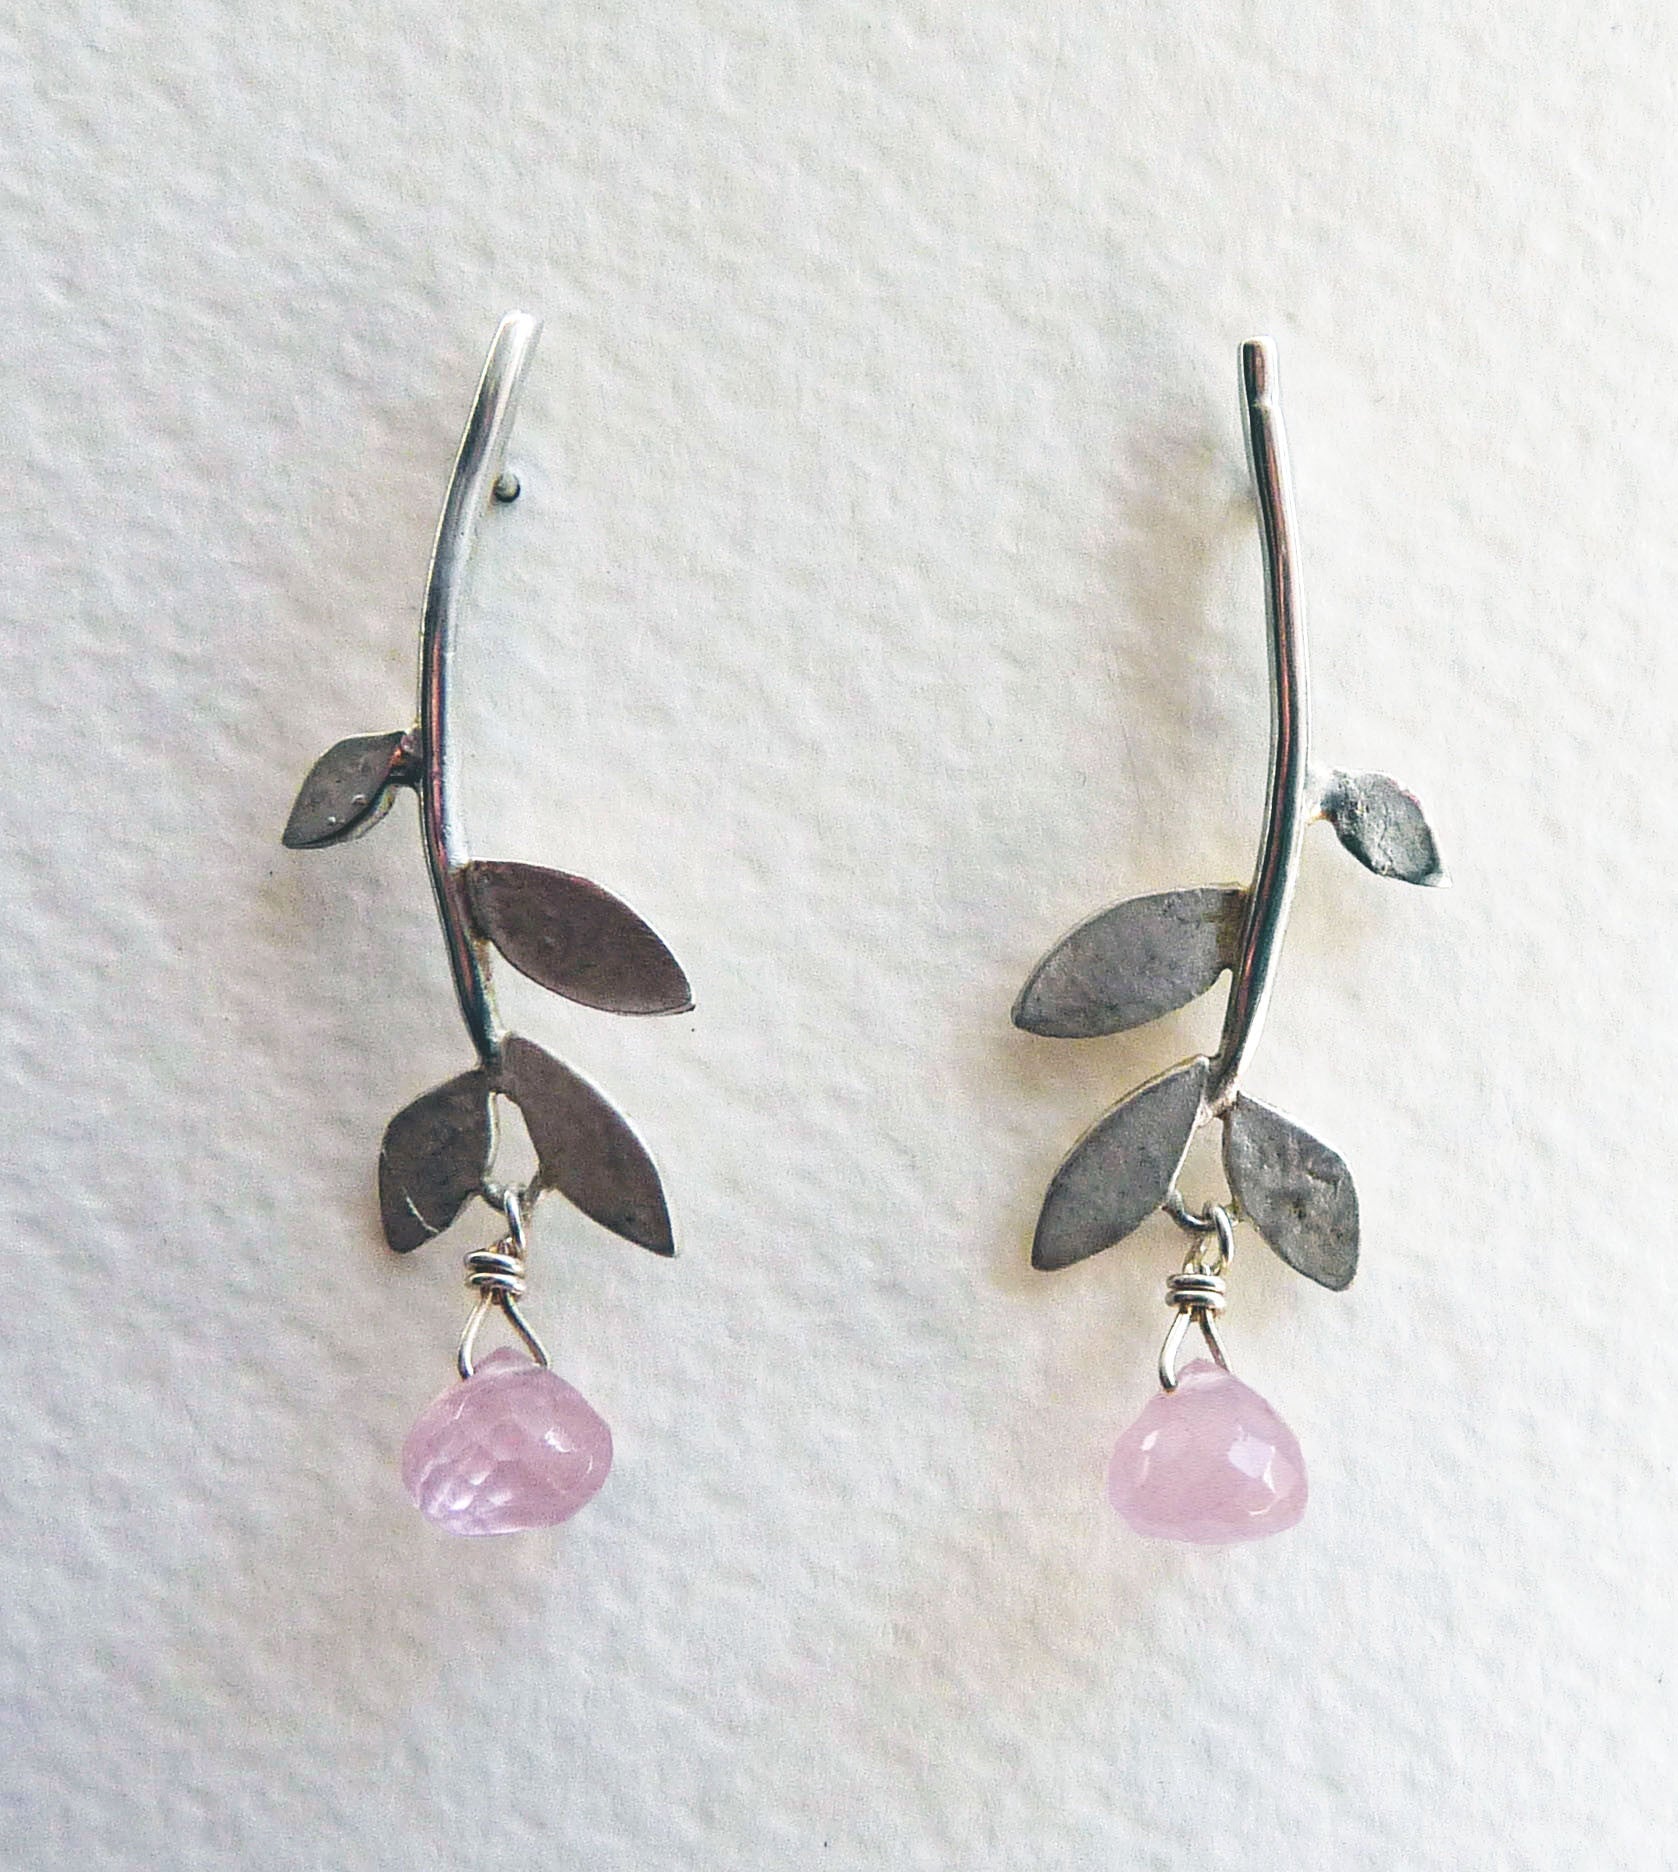 Blossoming, branch, jewellery, jewelry, earrings, studs, sterling, silver, nature, natural, leaf, leaves, peridot, rose, quartz, garnet